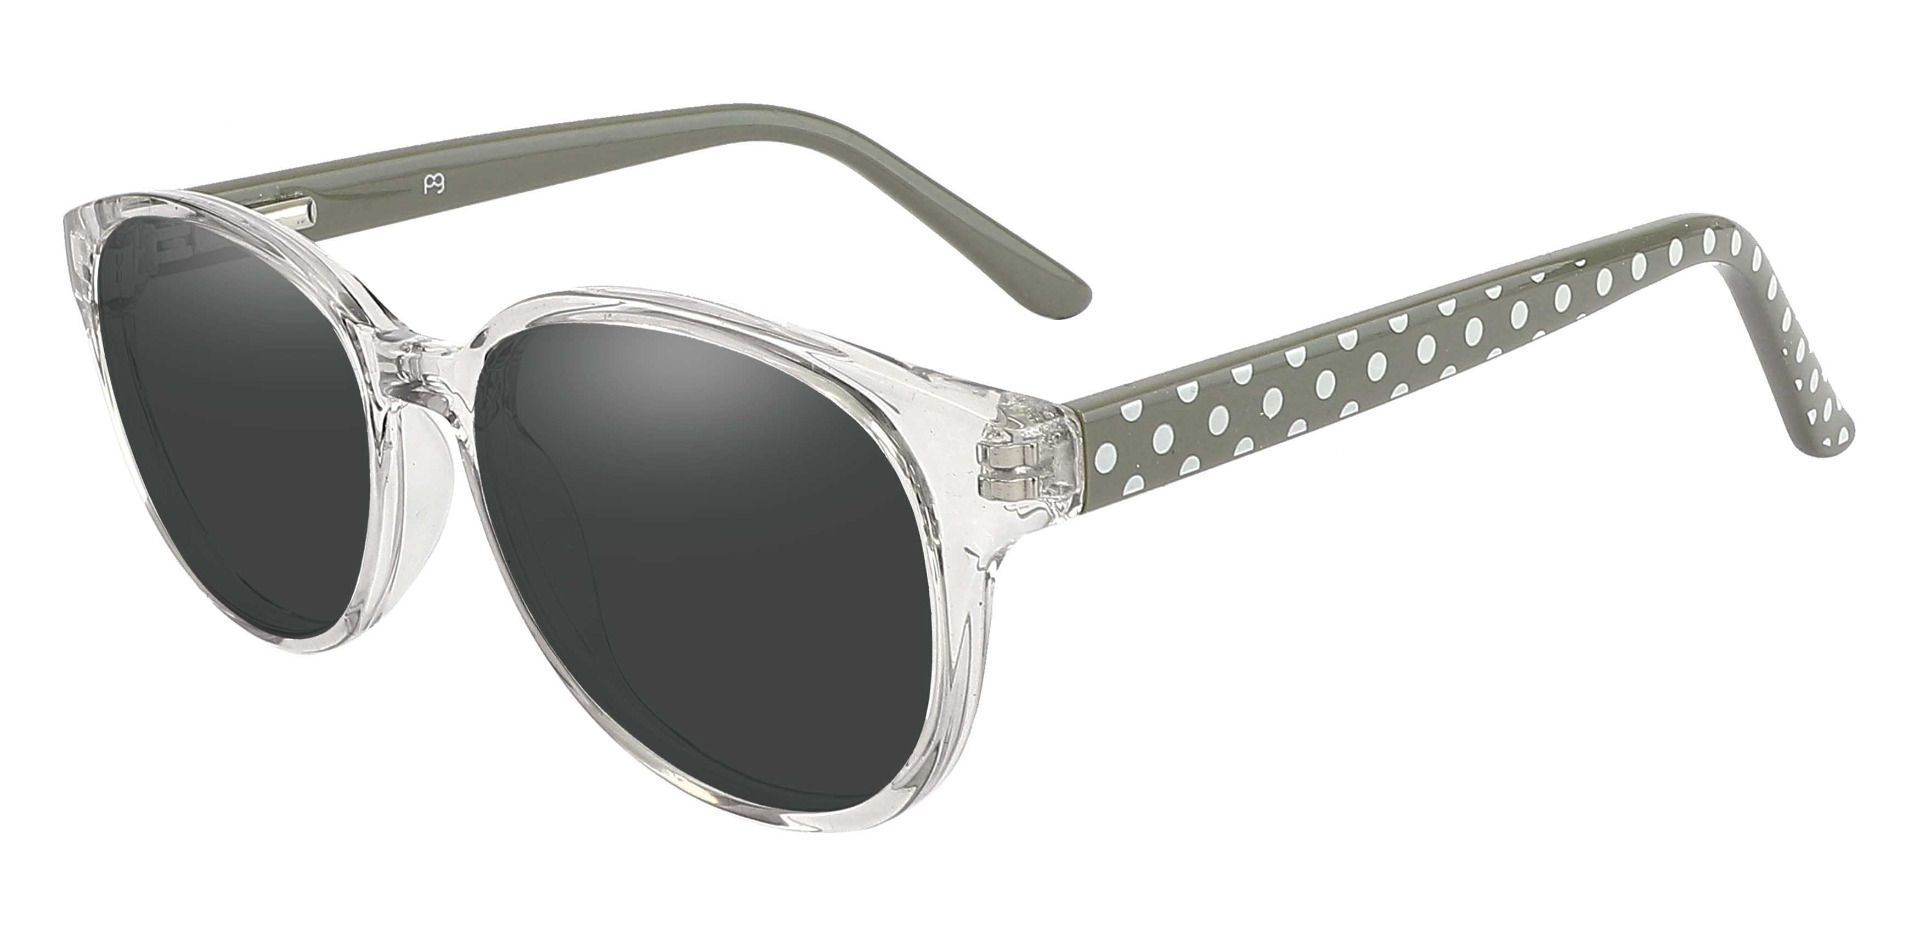 Libby Oval Non-Rx Sunglasses - Gray Frame With Gray Lenses